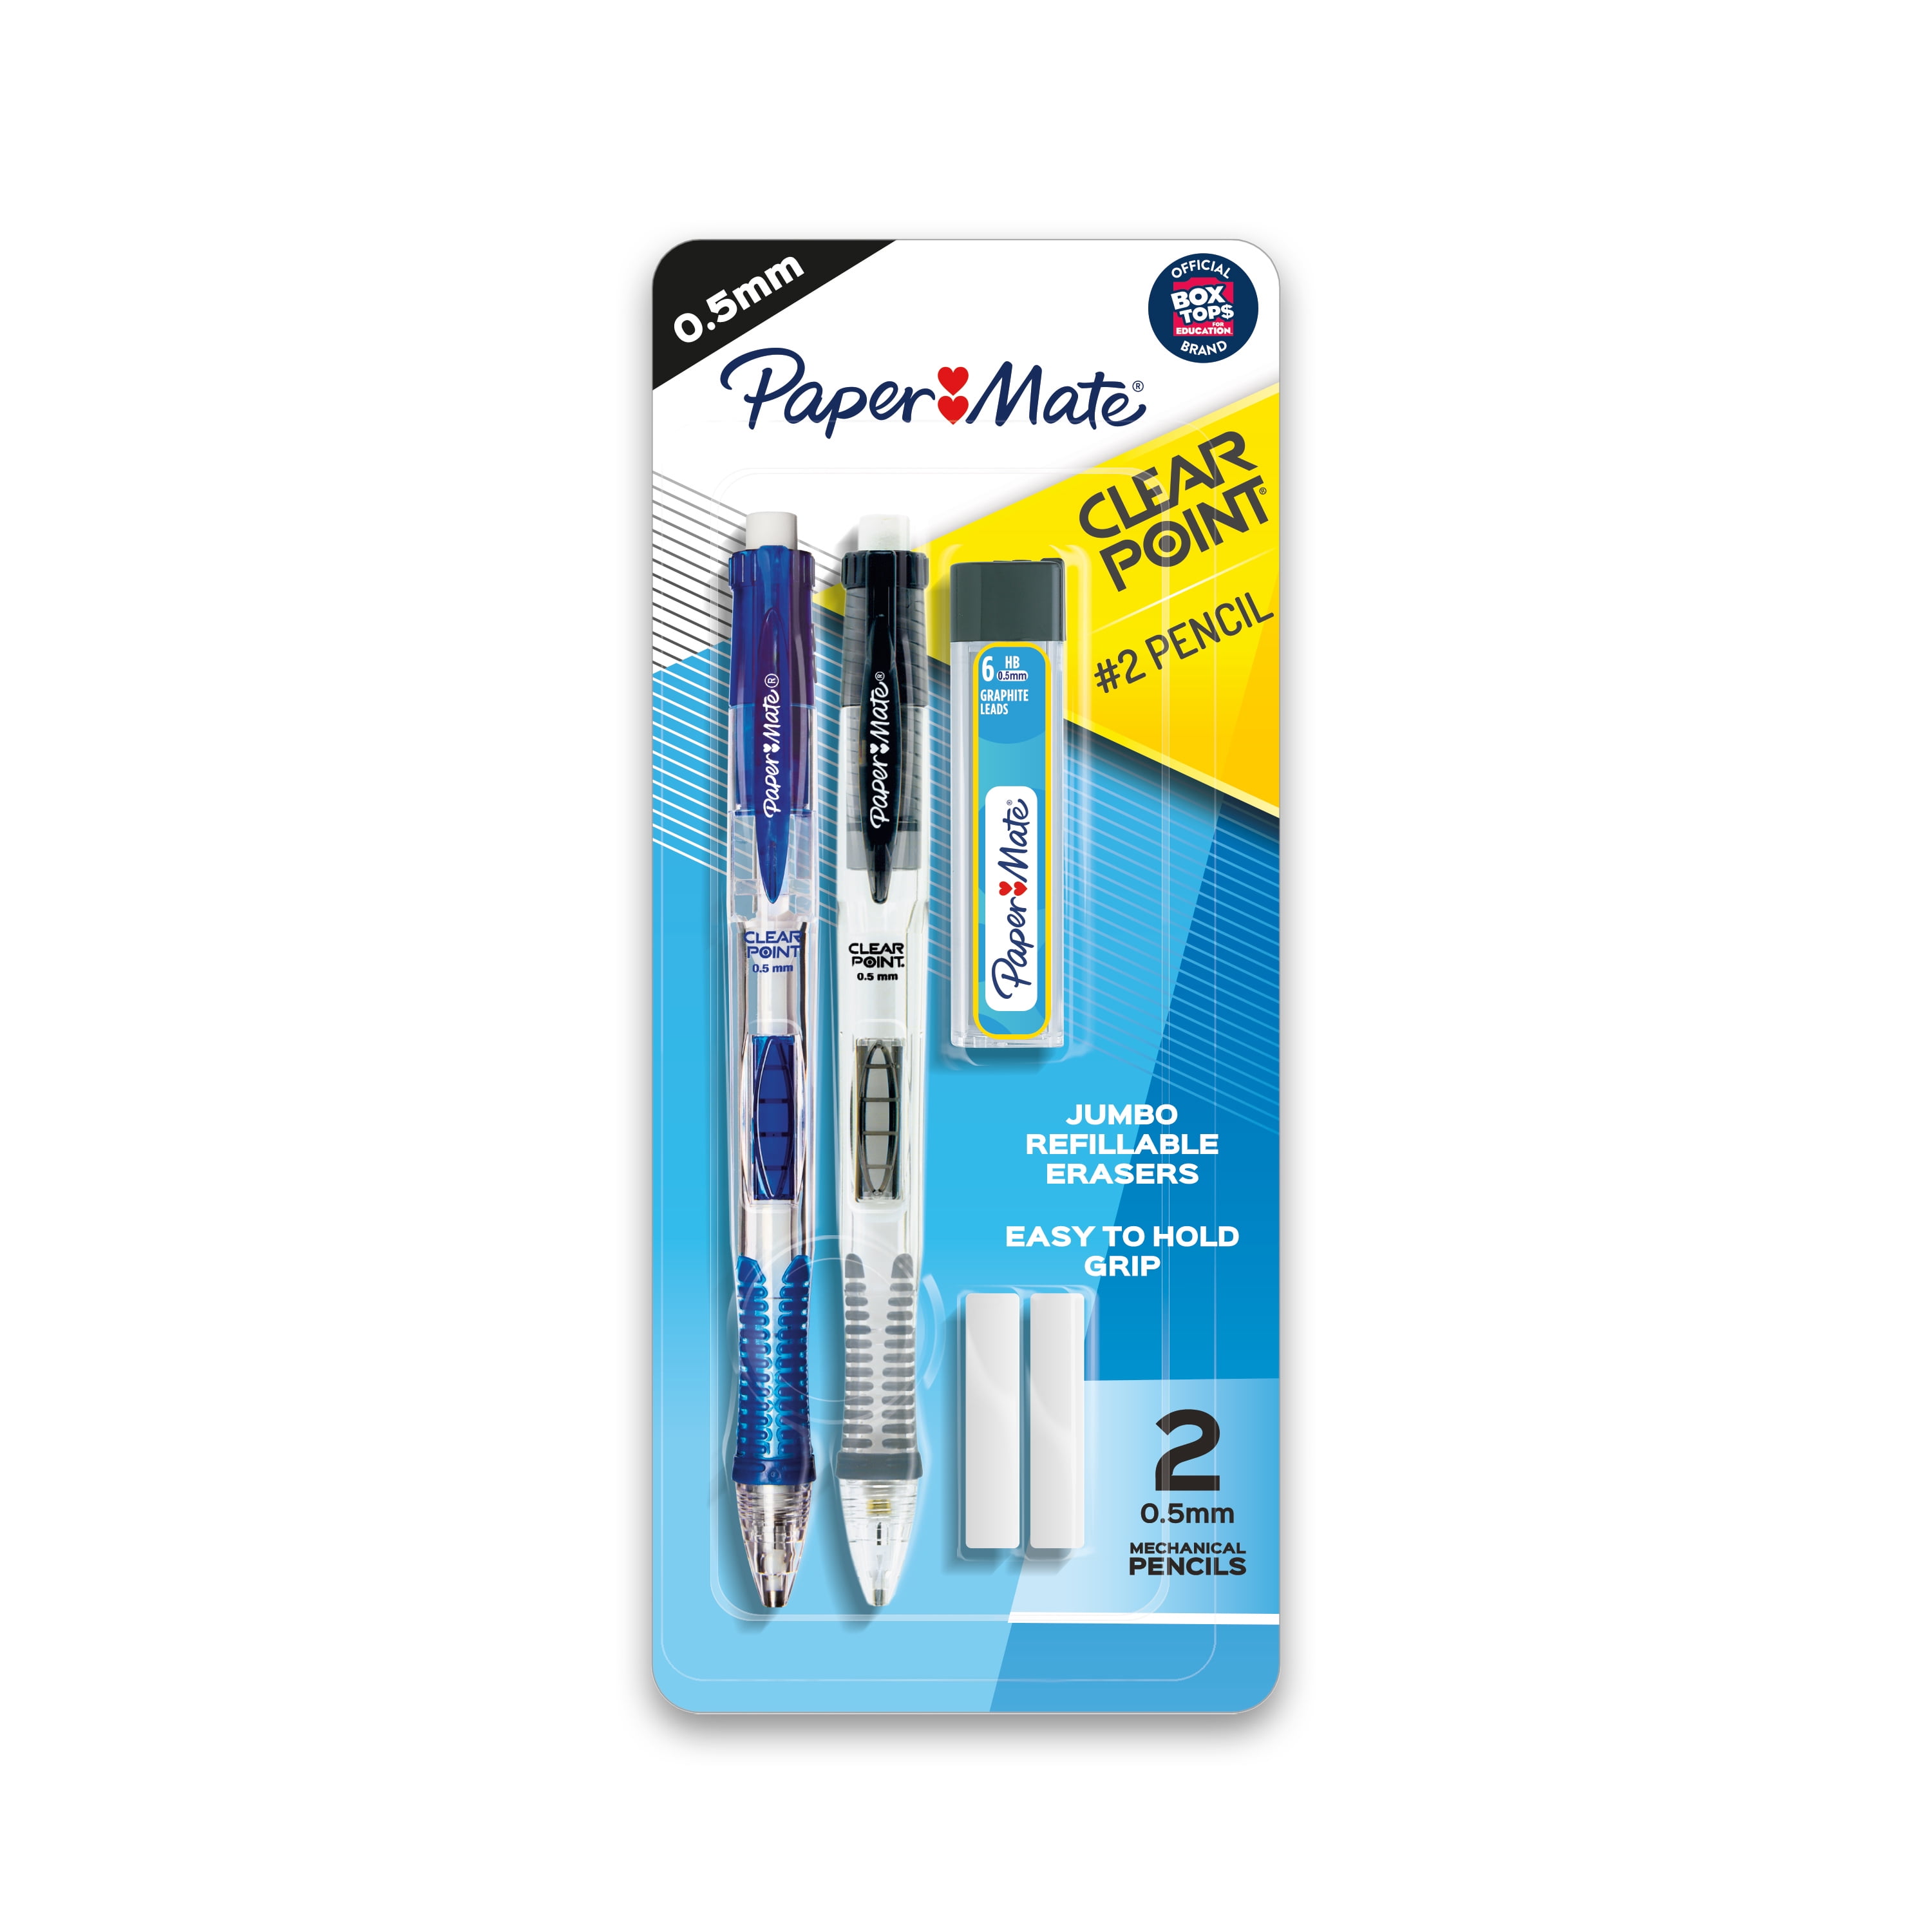 Paper Mate Clearpoint Mechanical Pencil Starter Set, 0.5 mm, 2 Pencils, 1 Lead Refill Set, 2 Erasers